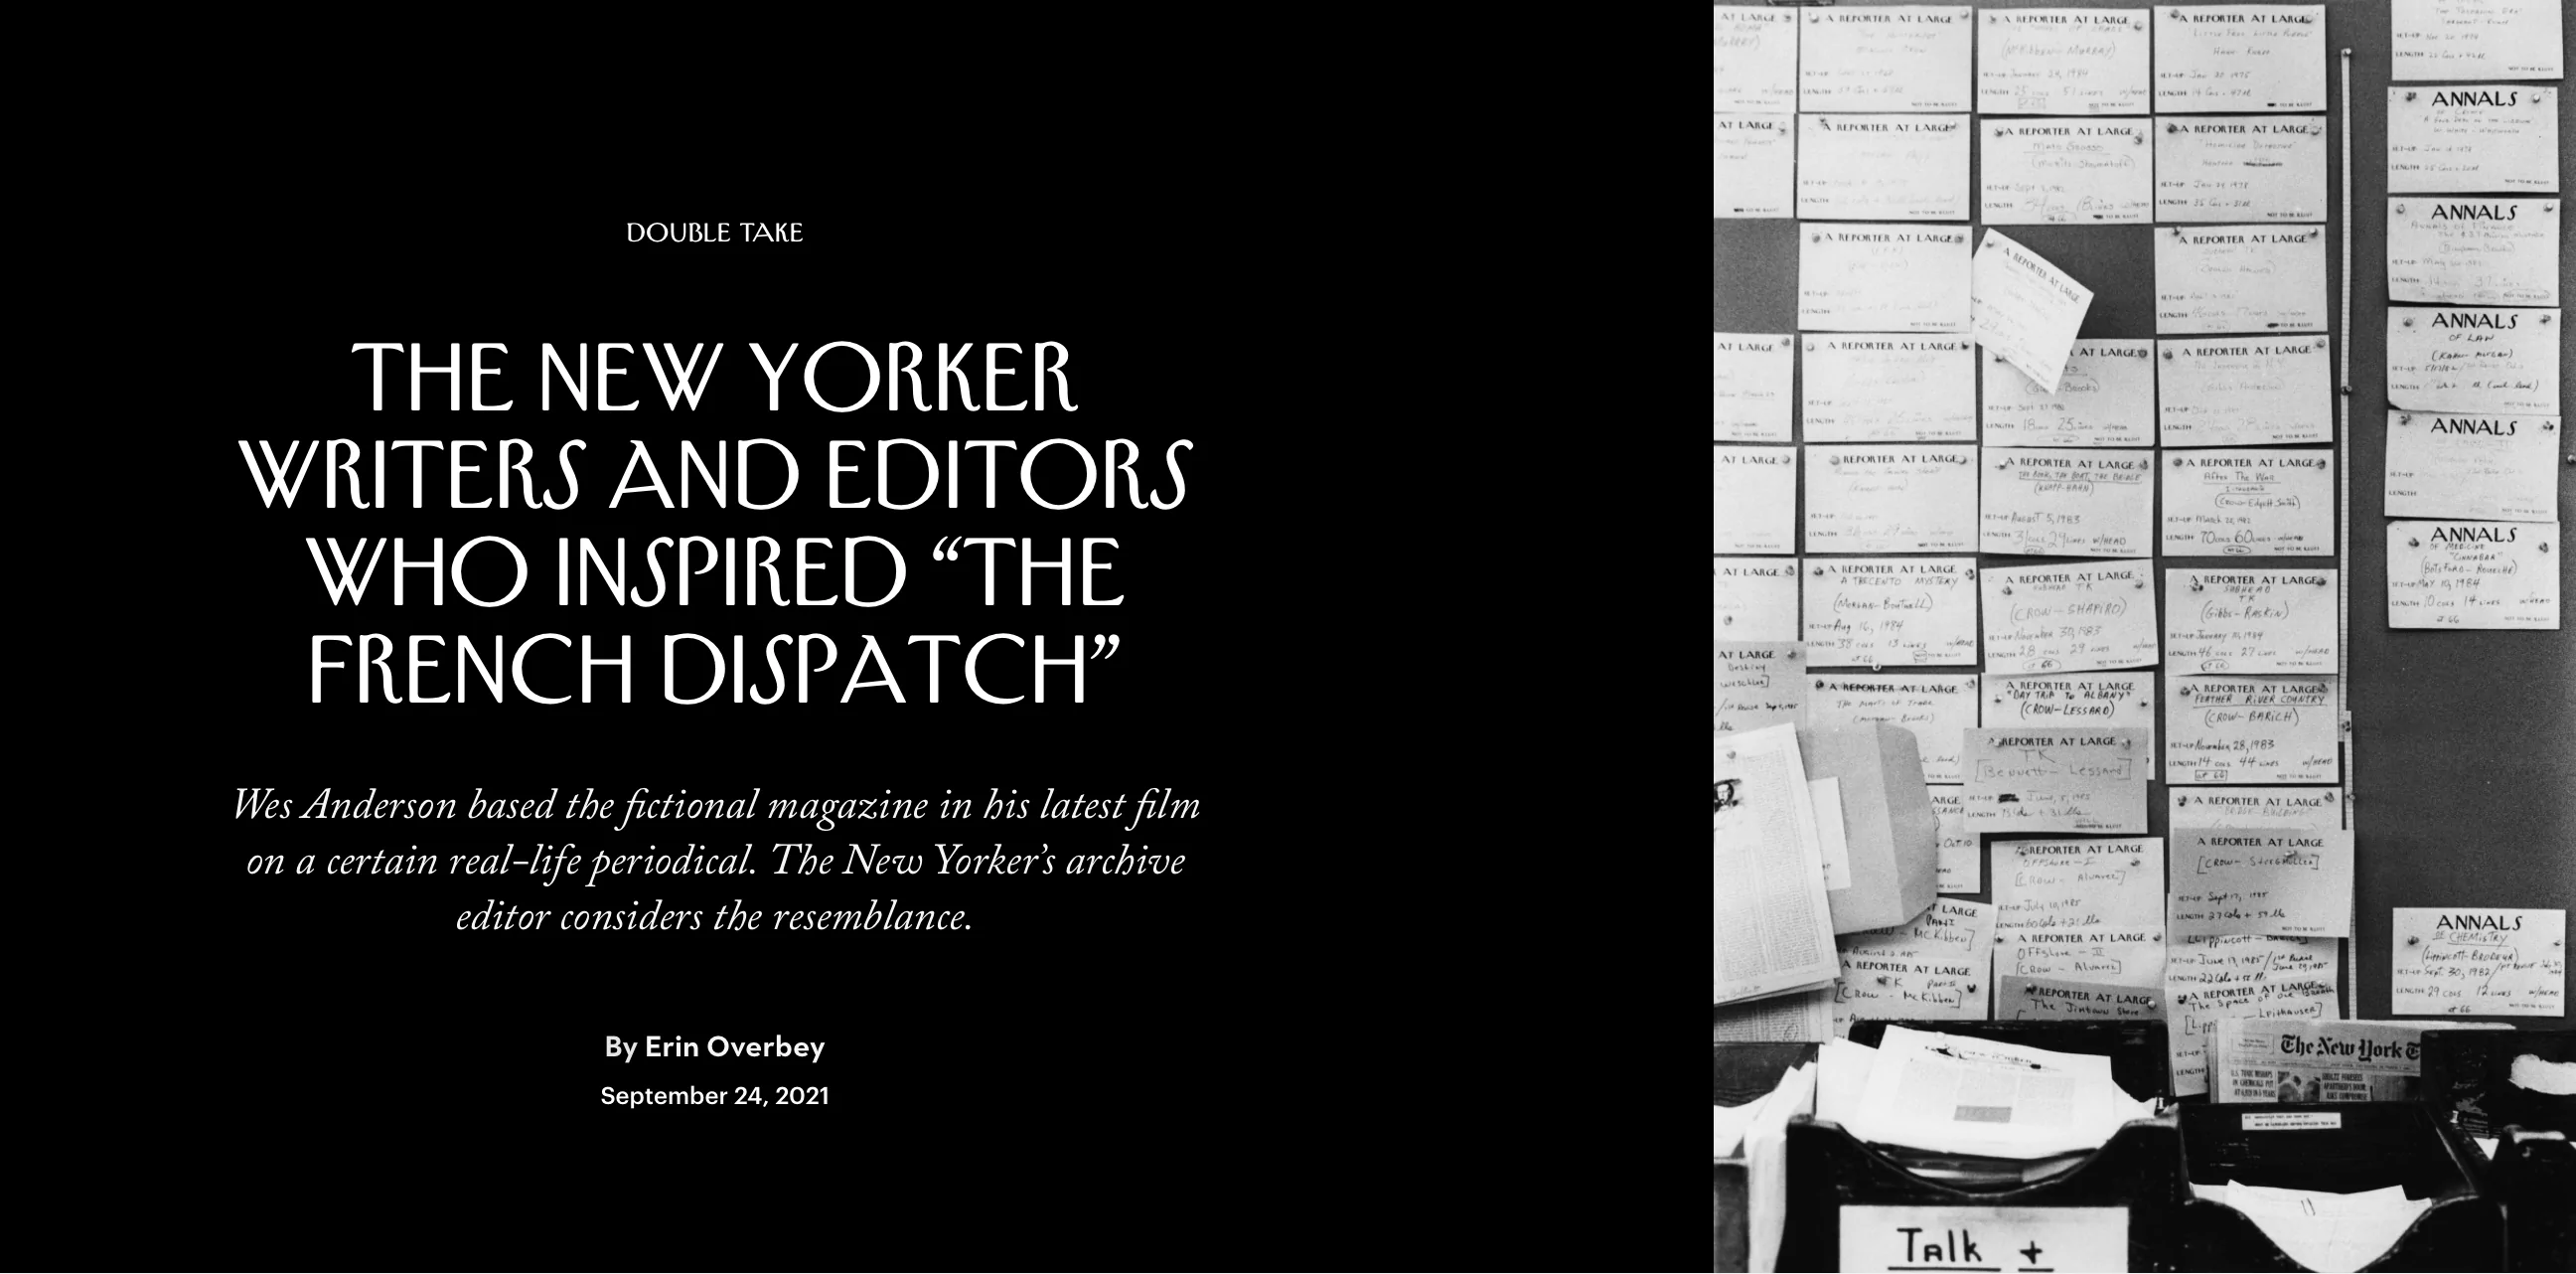 The New Yorker + The French Dispatch